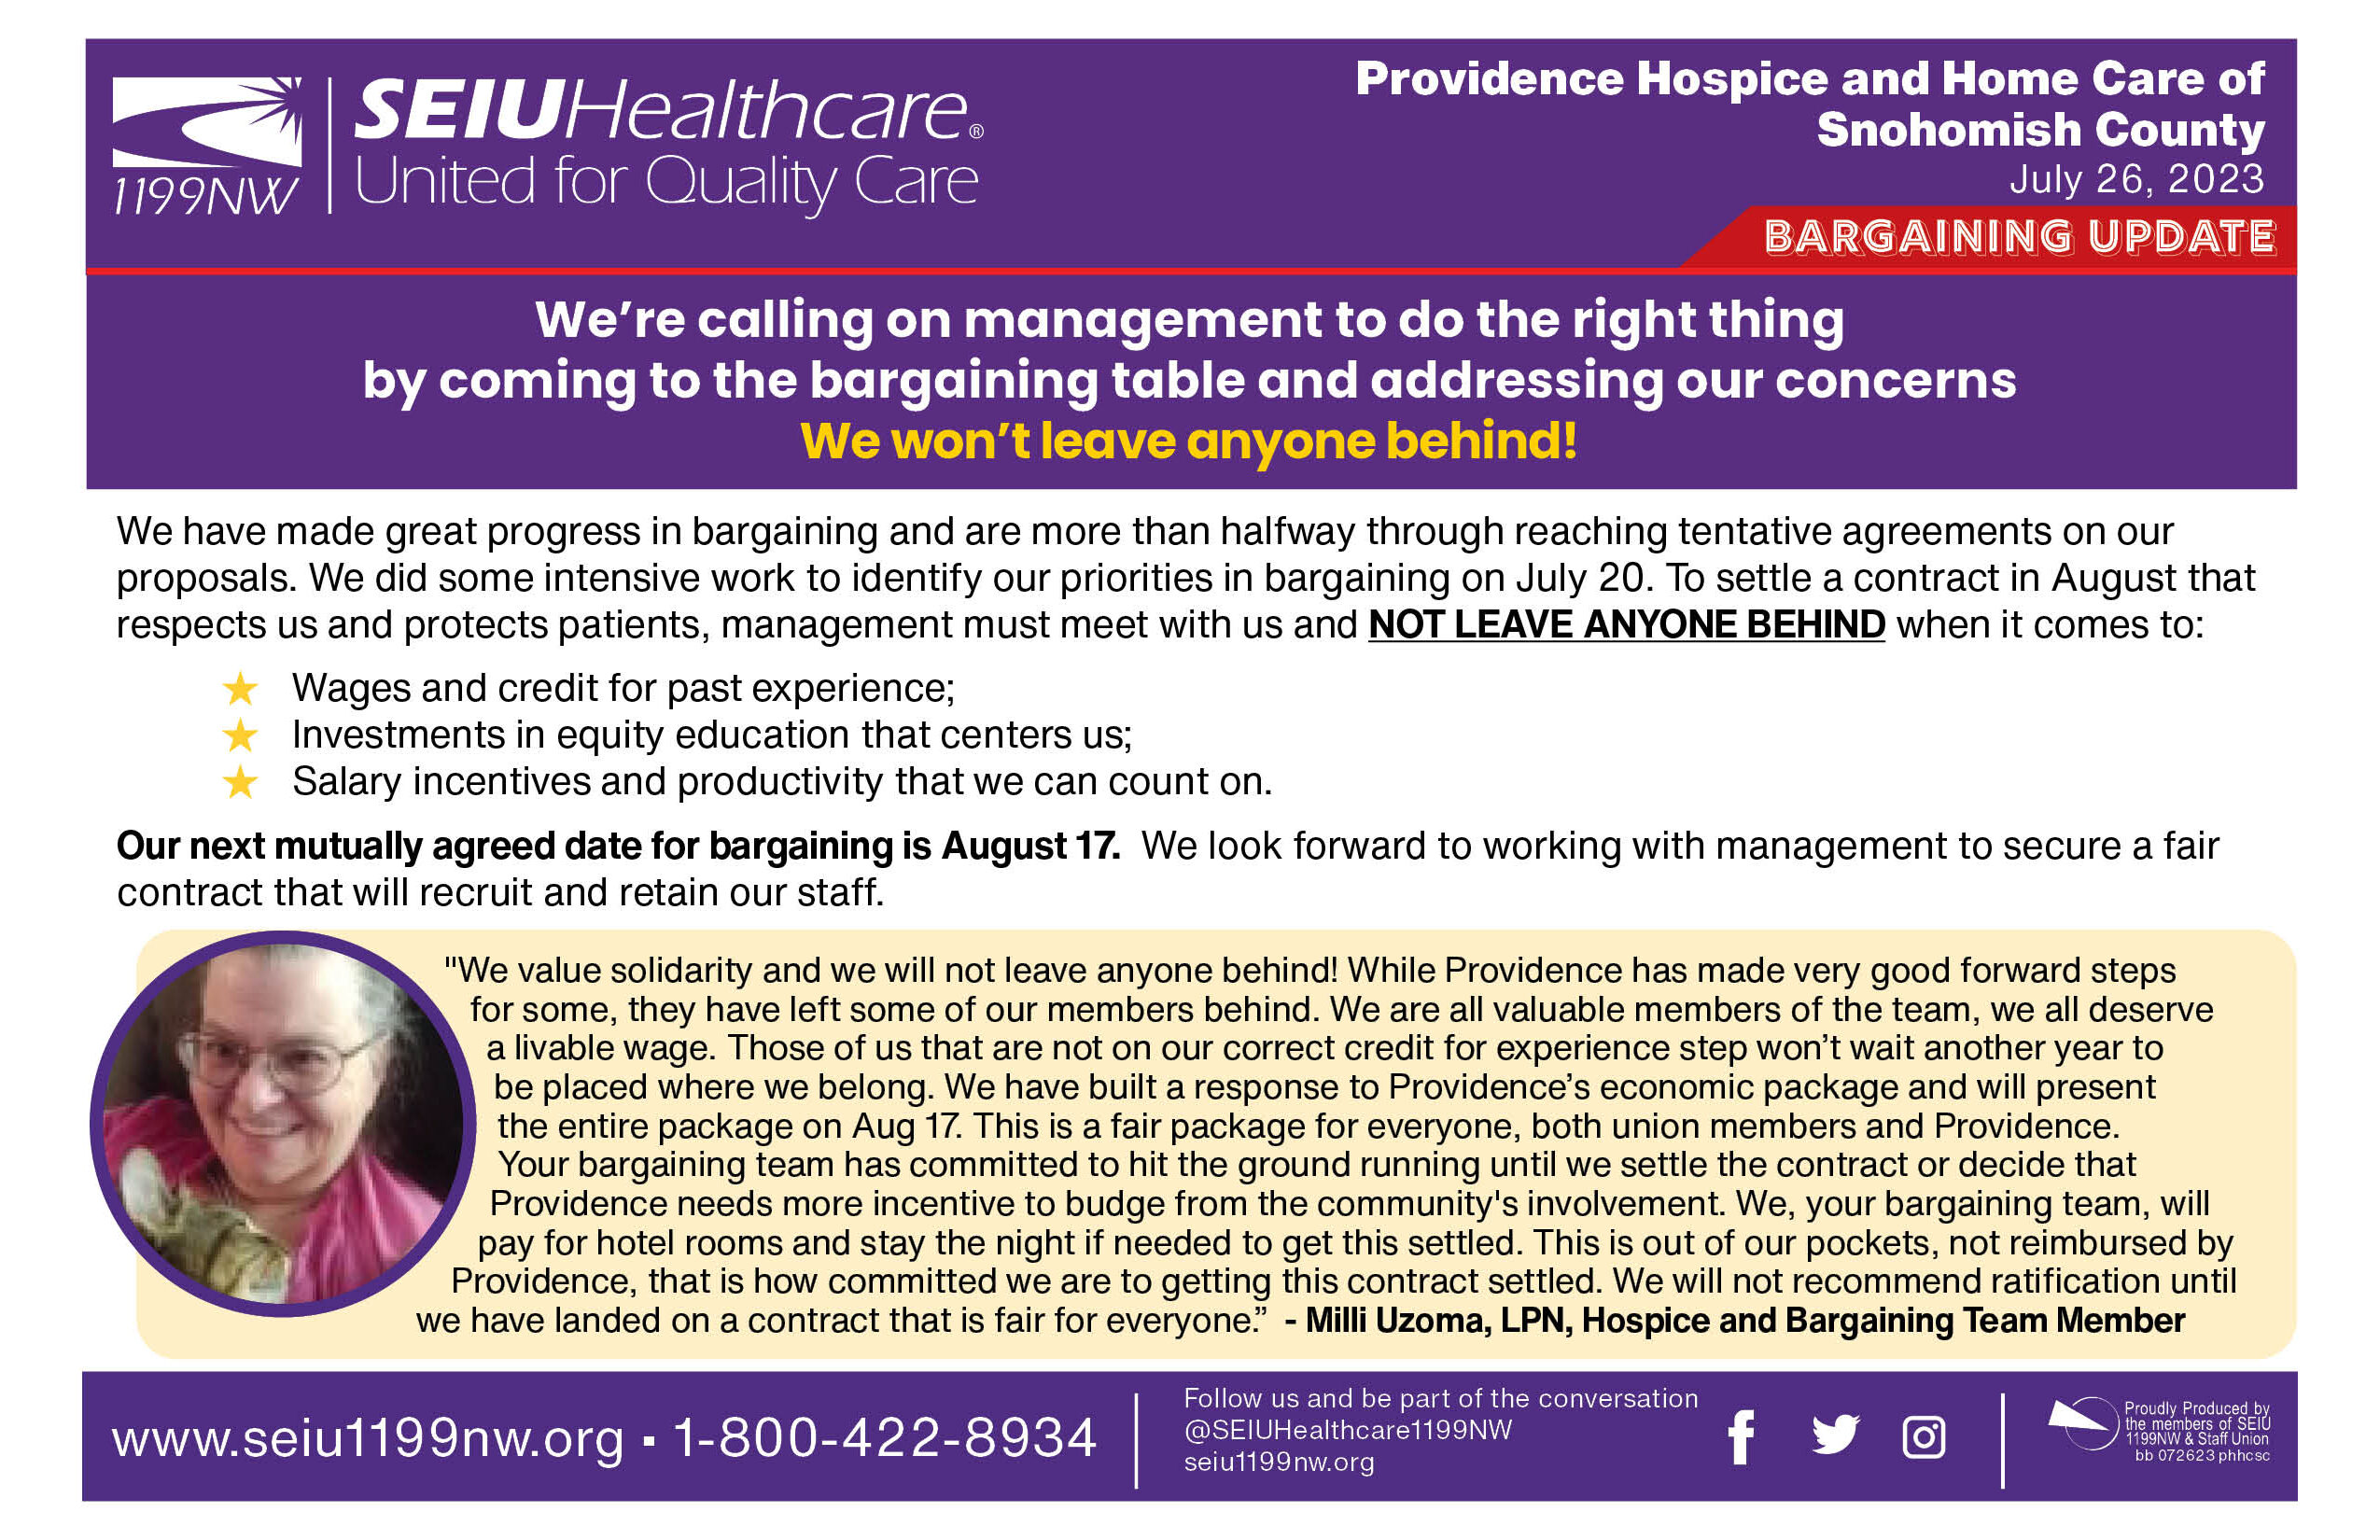 We’re calling on management to do the right thing by coming to the bargaining table and addressing our concerns